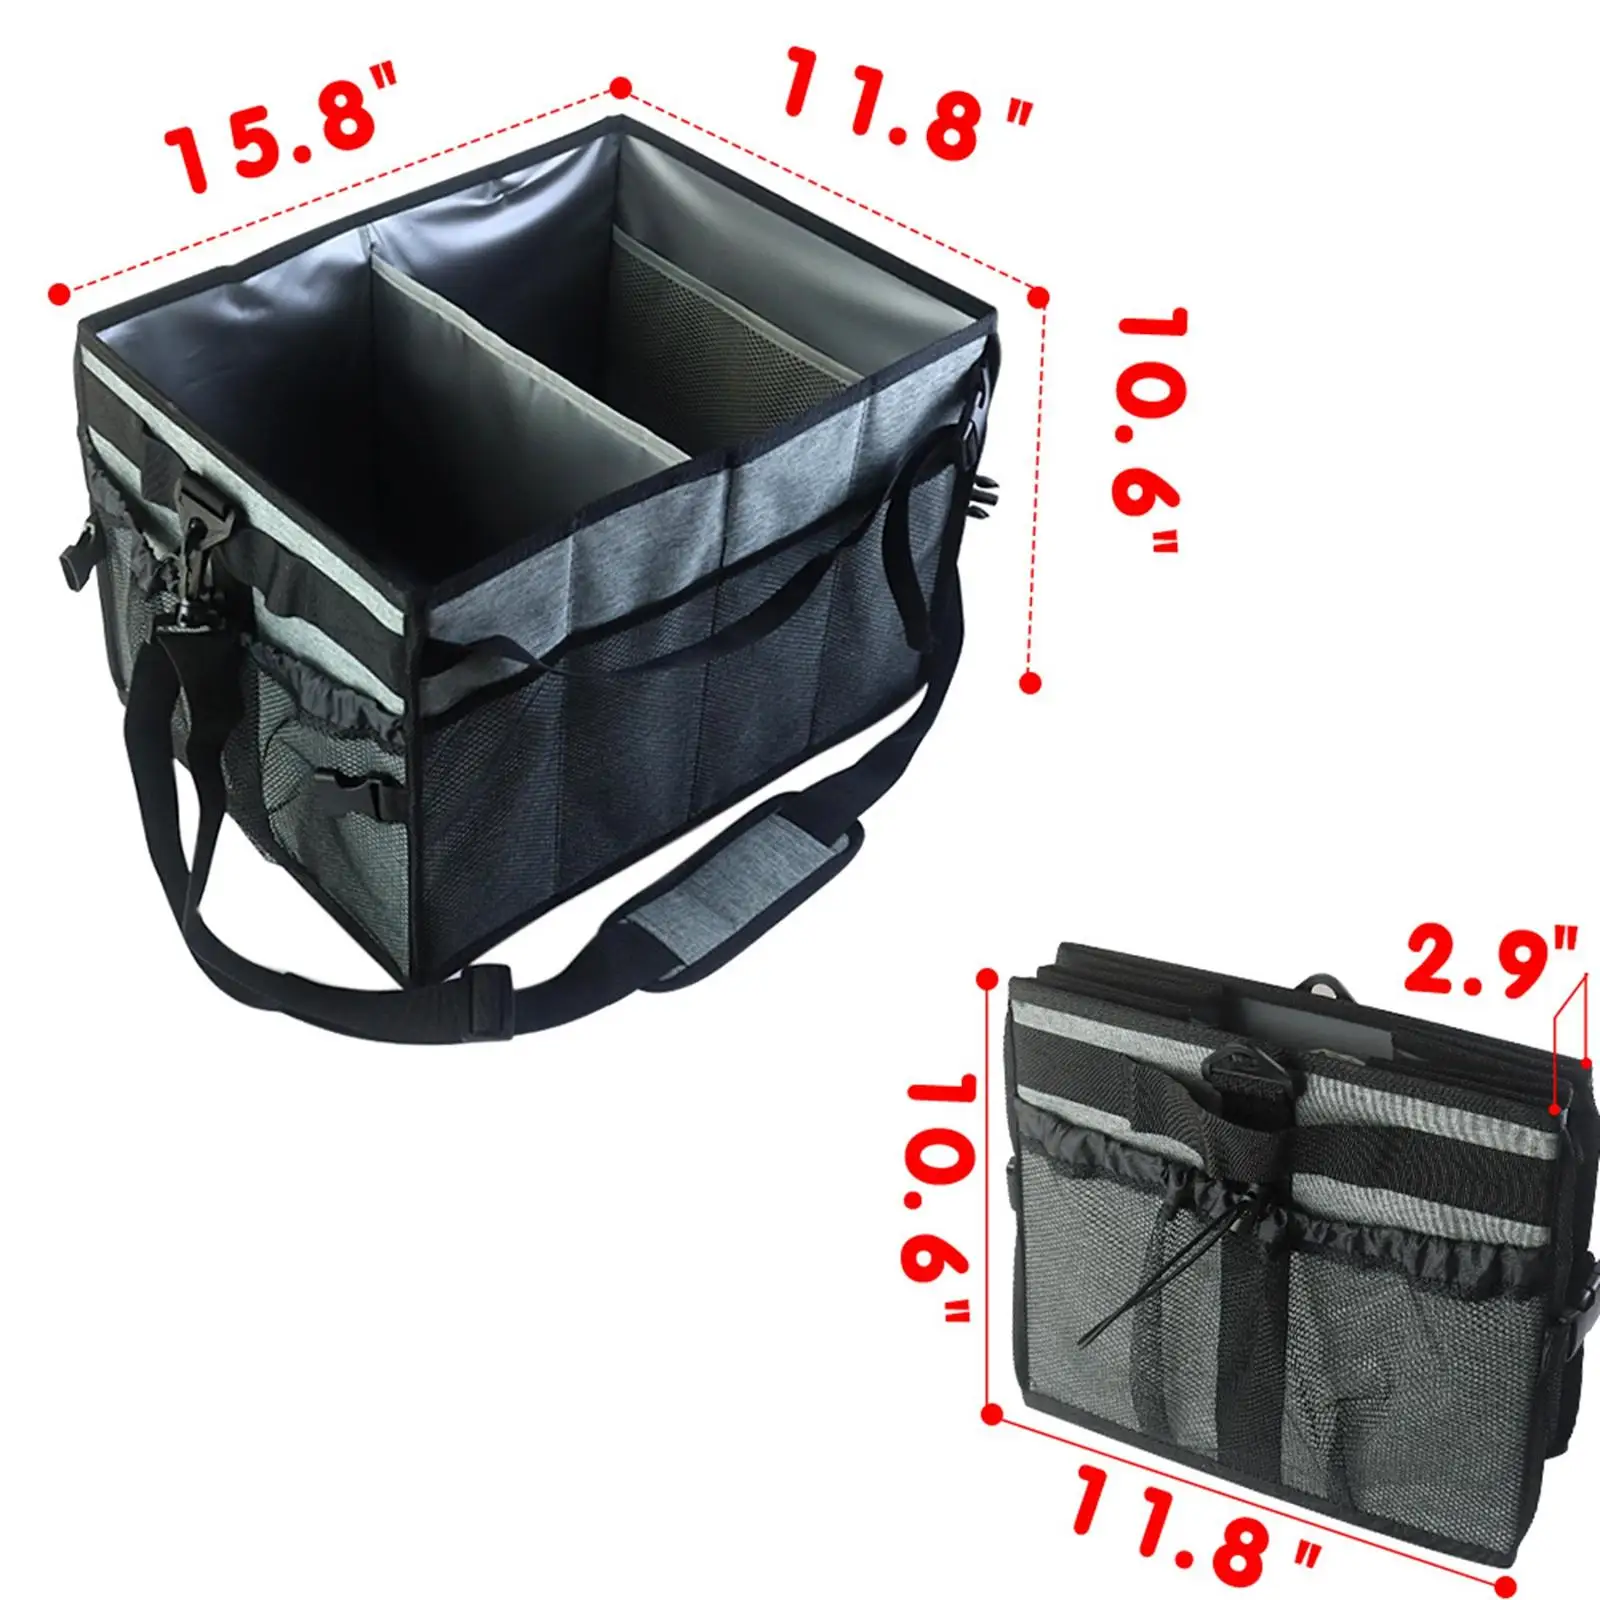 Barbecue Tool Storage Bag Waterproof with Handle Collapsible Basket Utensils Organizer for Cooking Tourism Grill Accessory Car